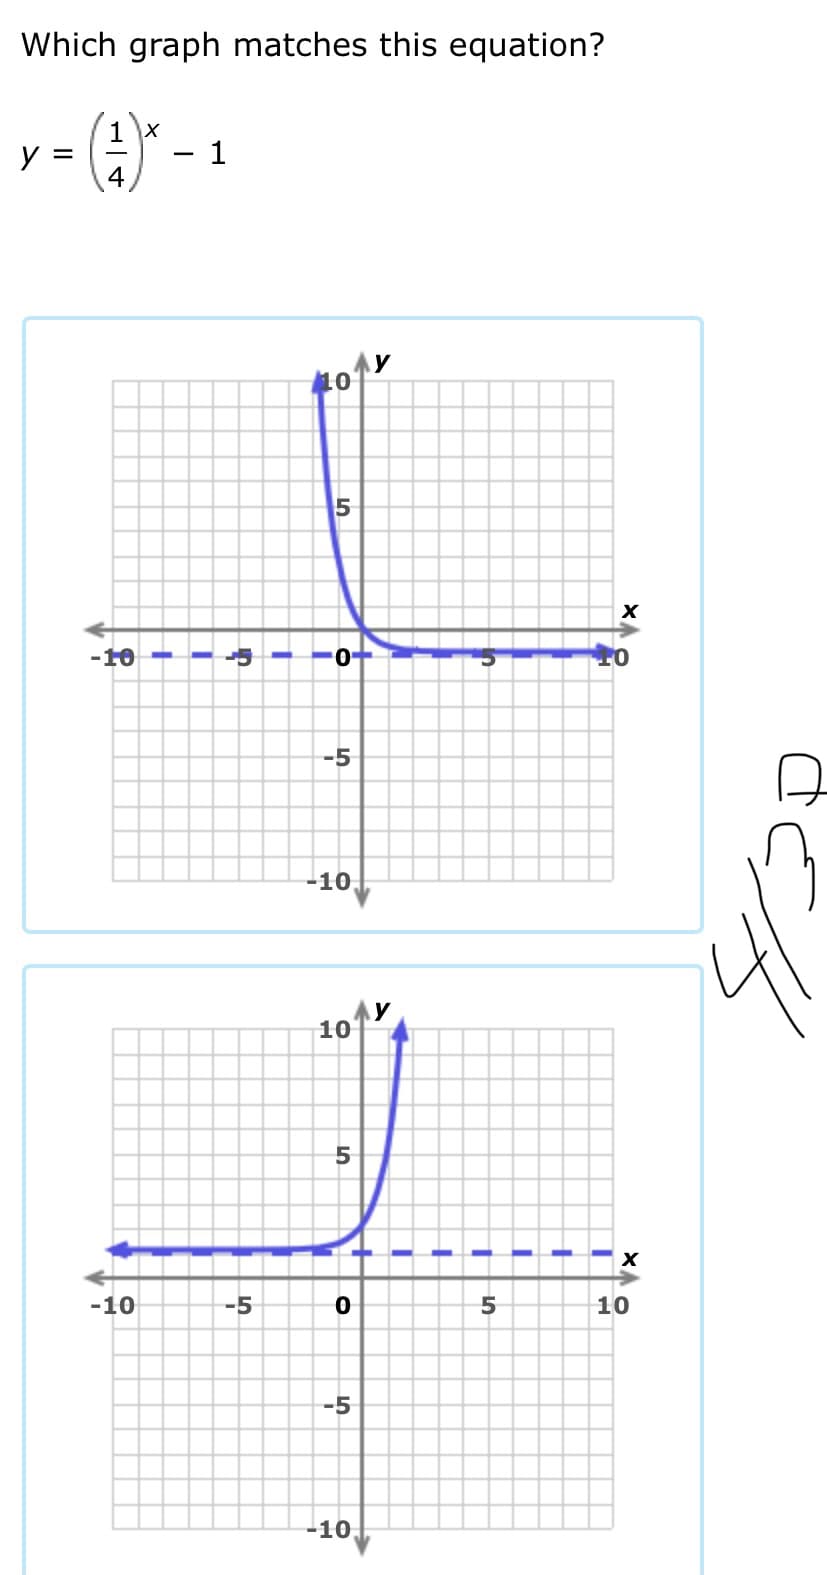 Which graph matches this equation?
- (4" -
1 \x
1
y =
y
-10
To
-5
-10
y
10
5
-10
-5
10
-5
-10,
